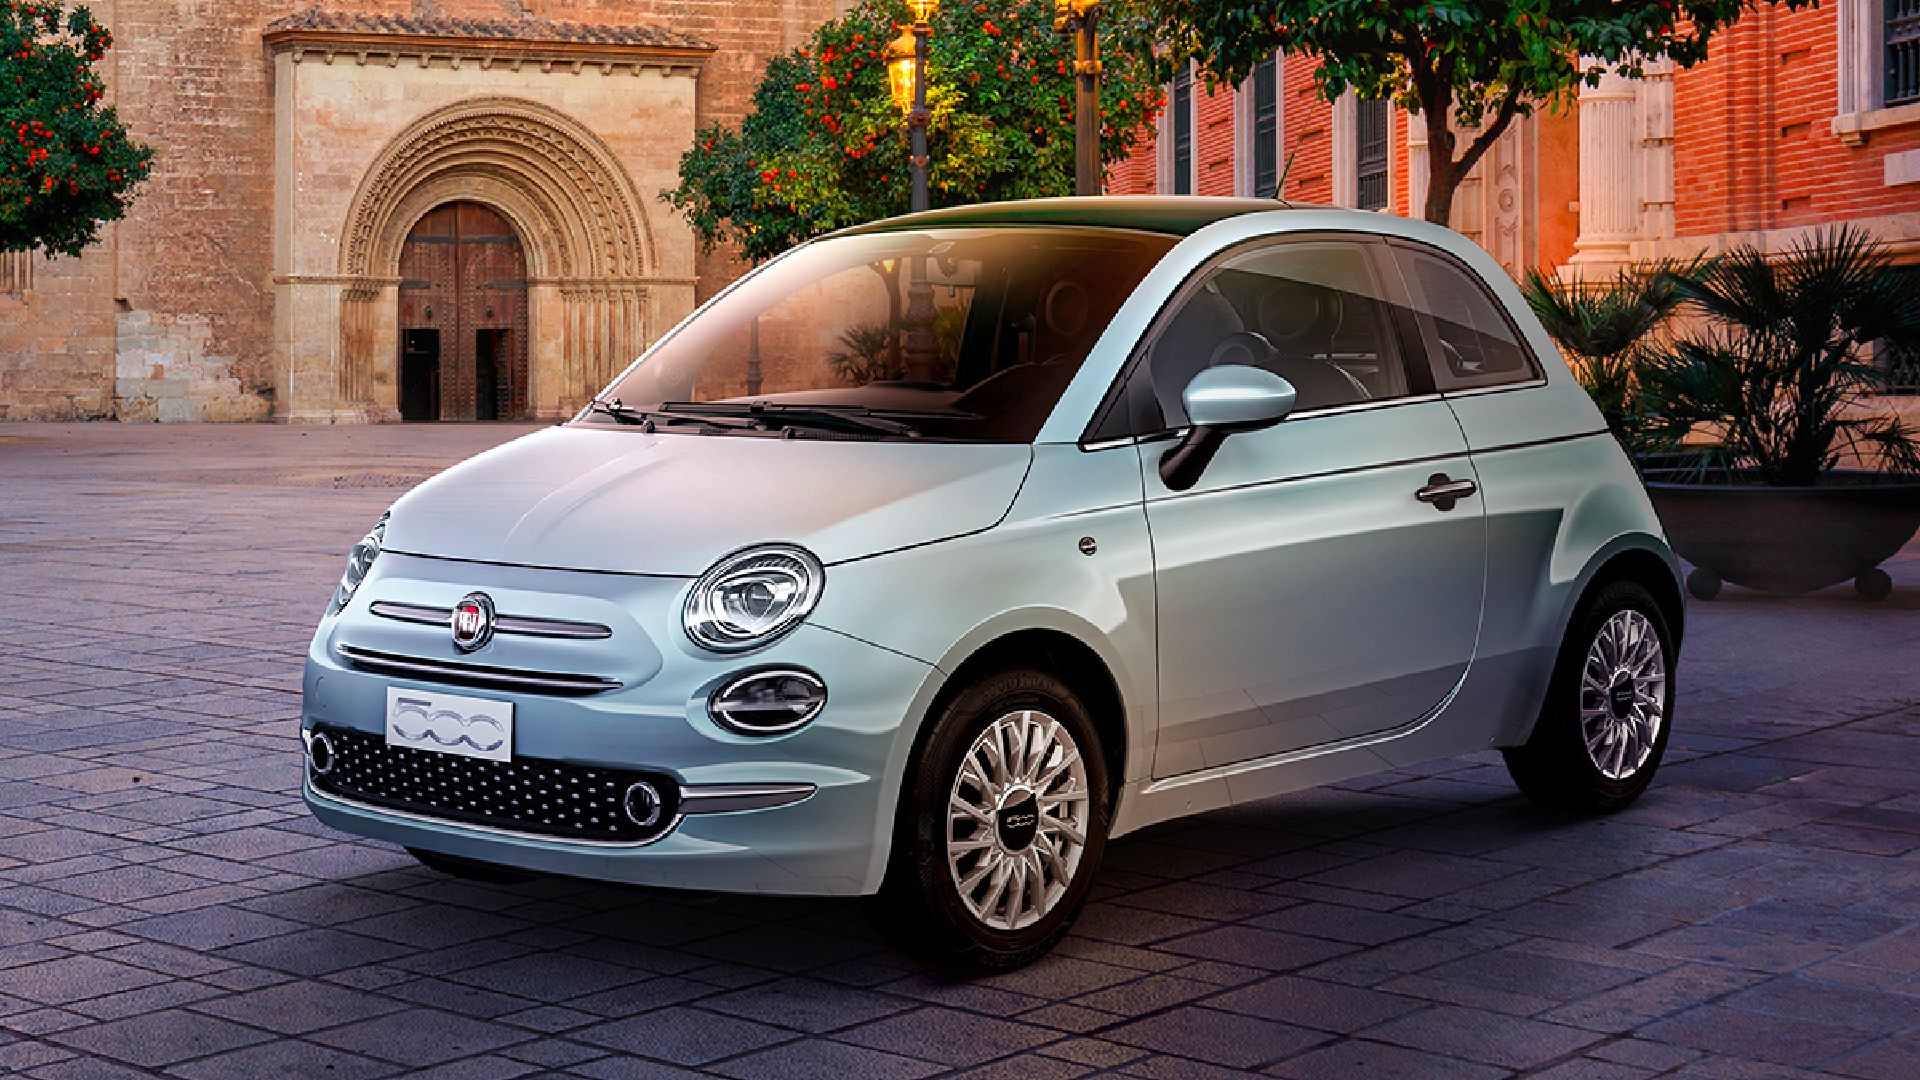 Fiat 500 hybrid to replace petrol model in 2026 (Source: Fiat)